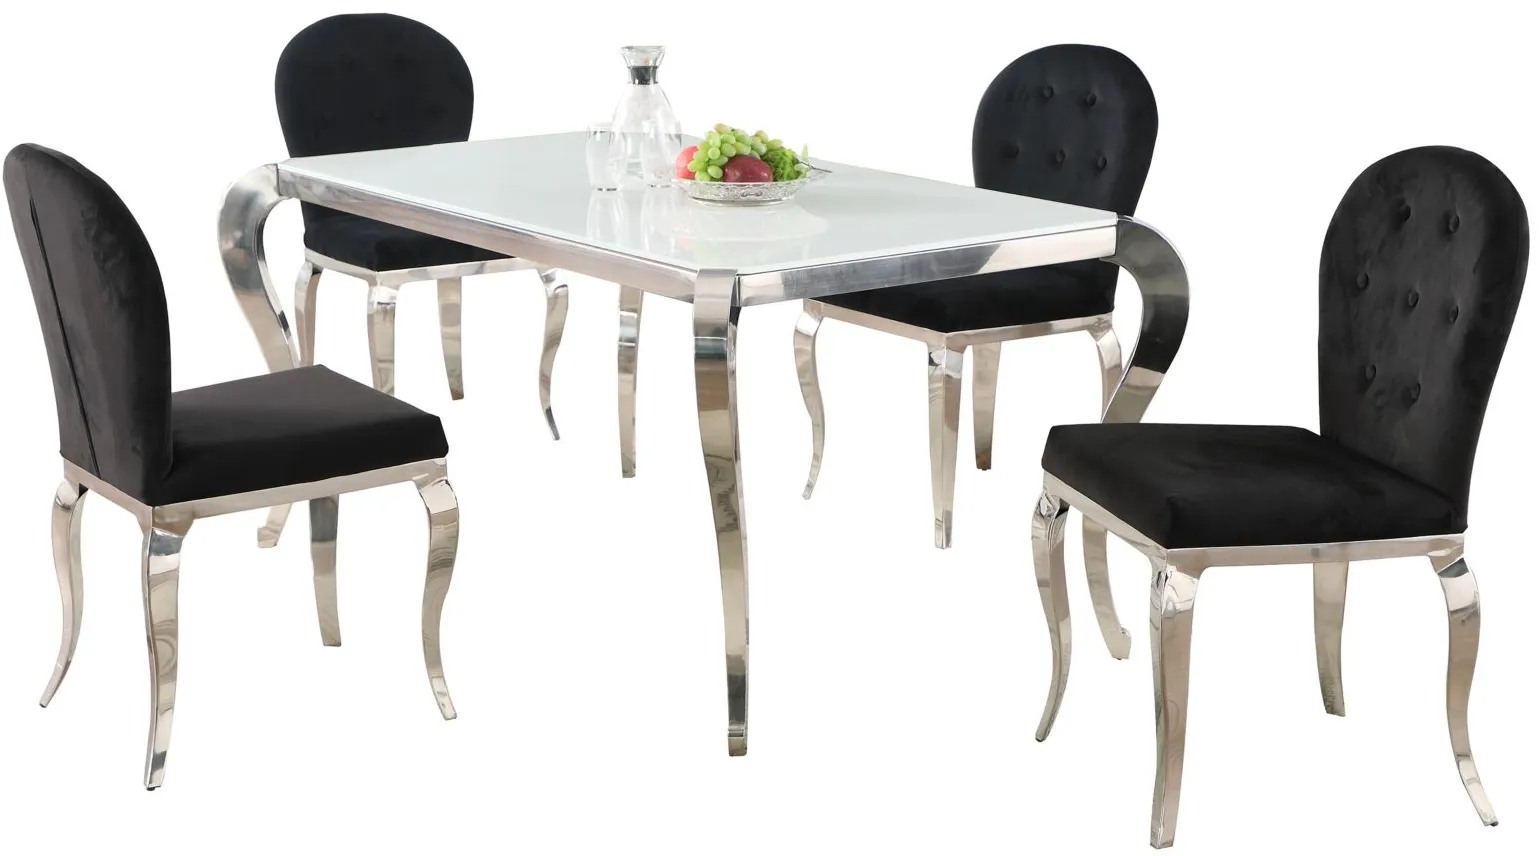 Teresa 5-pc. Dining Set in Black and White by Chintaly Imports